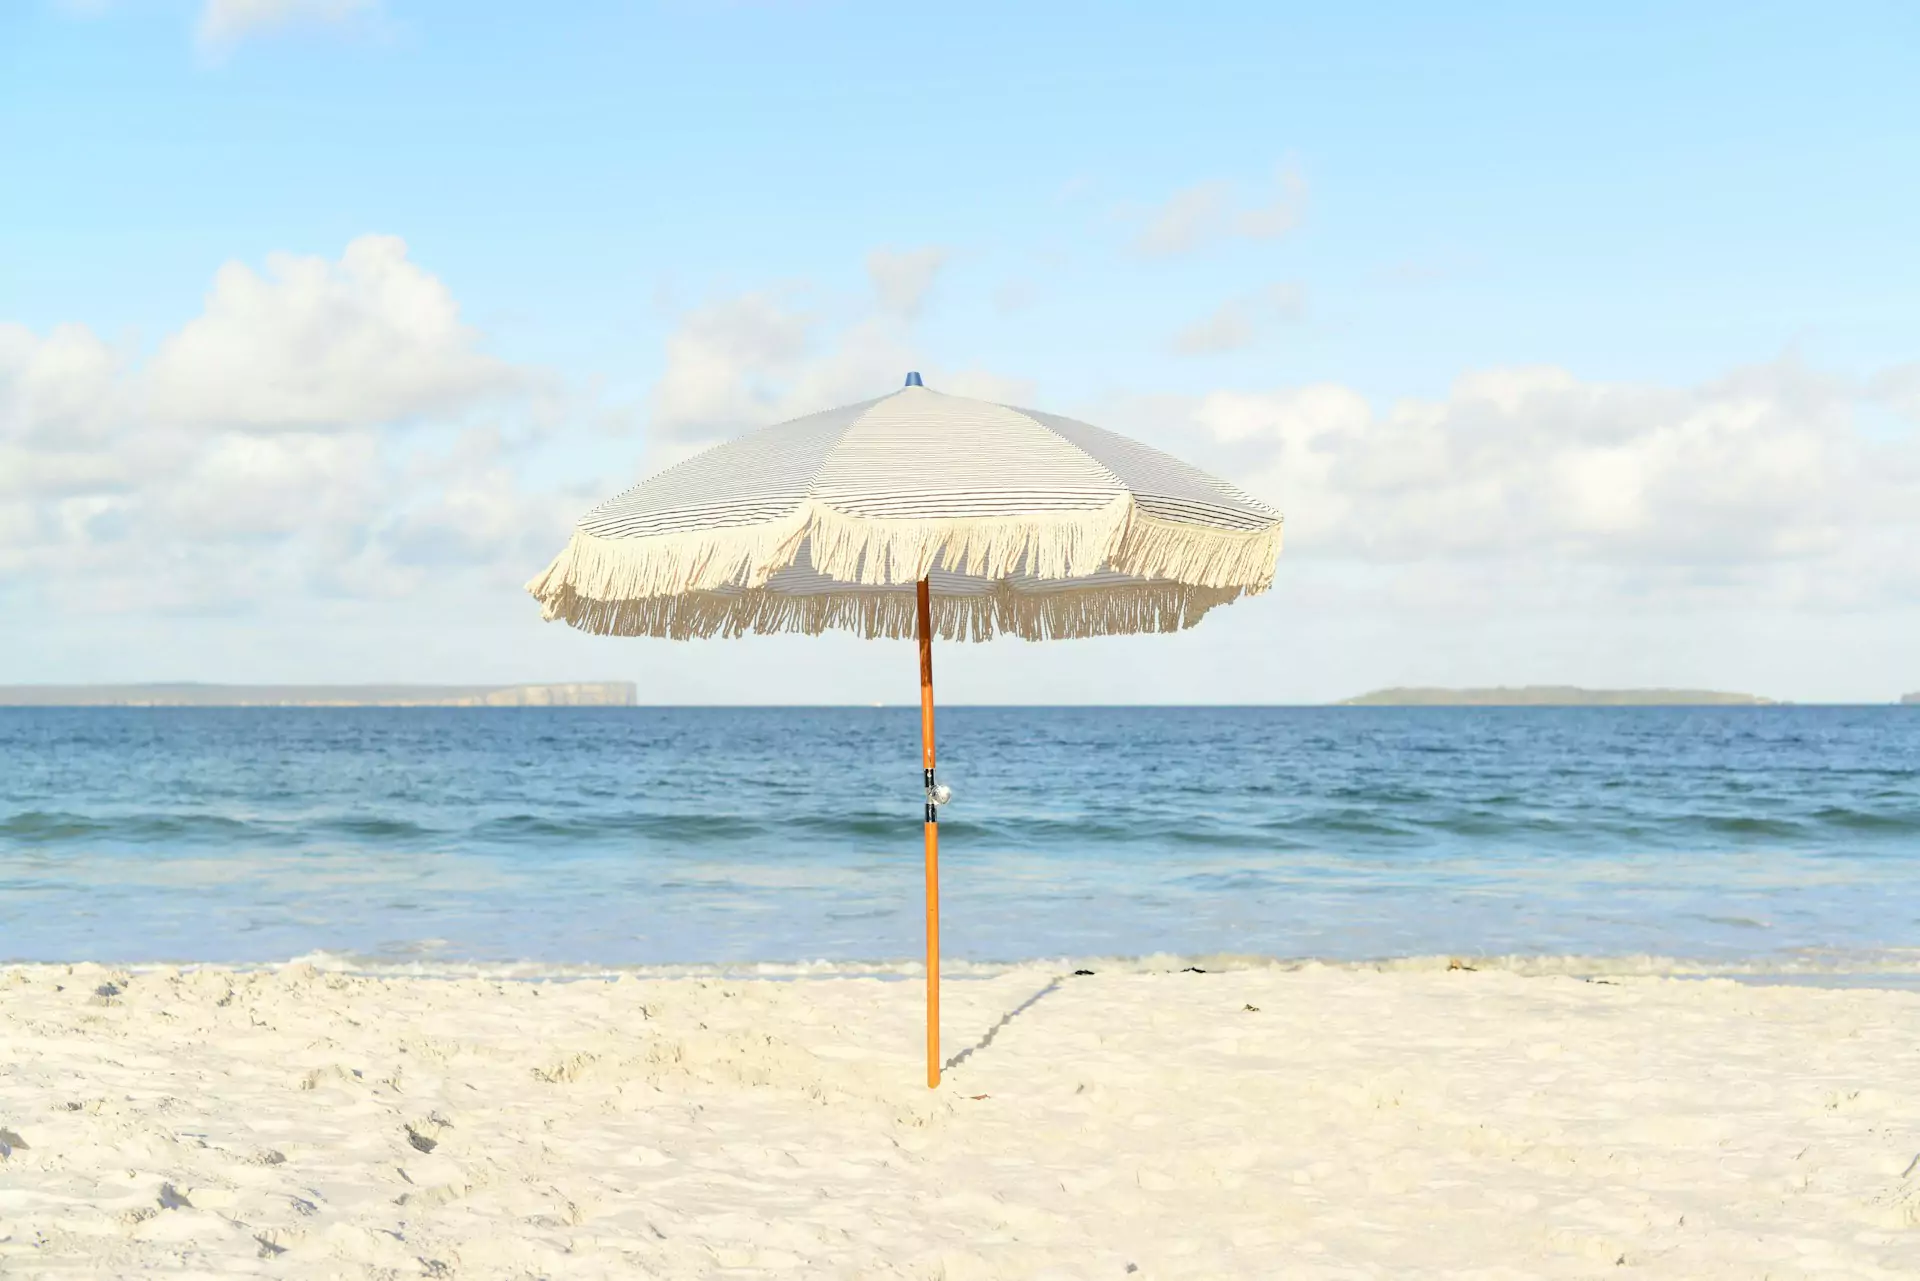 A beach umbrella providing shade on the sandy beach, creating a relaxing and inviting atmosphere. Safety initiative for heat stroke.